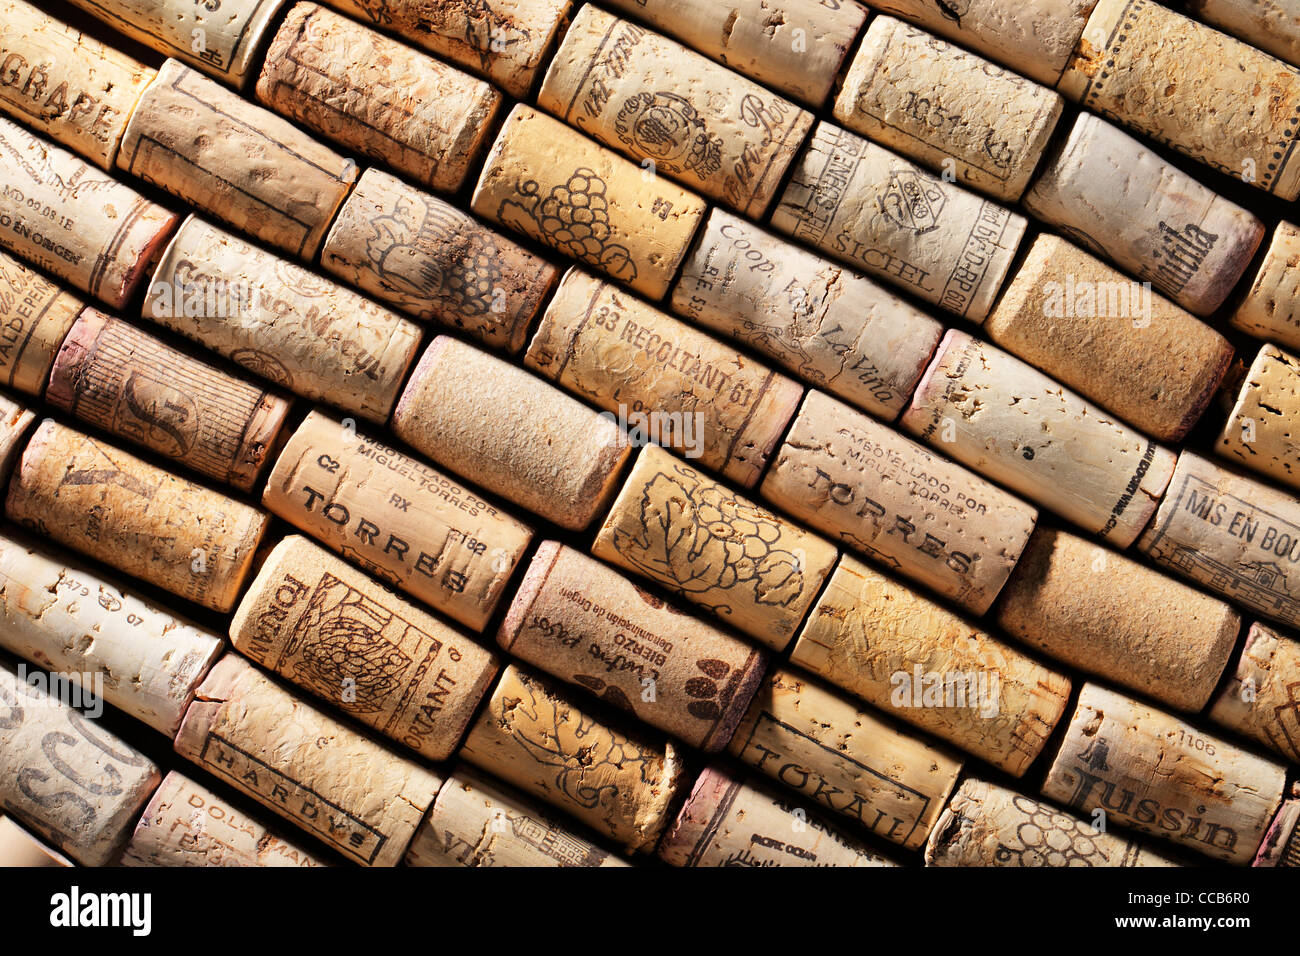 Natural cork wine bottle stoppers from around the world. Stock Photo